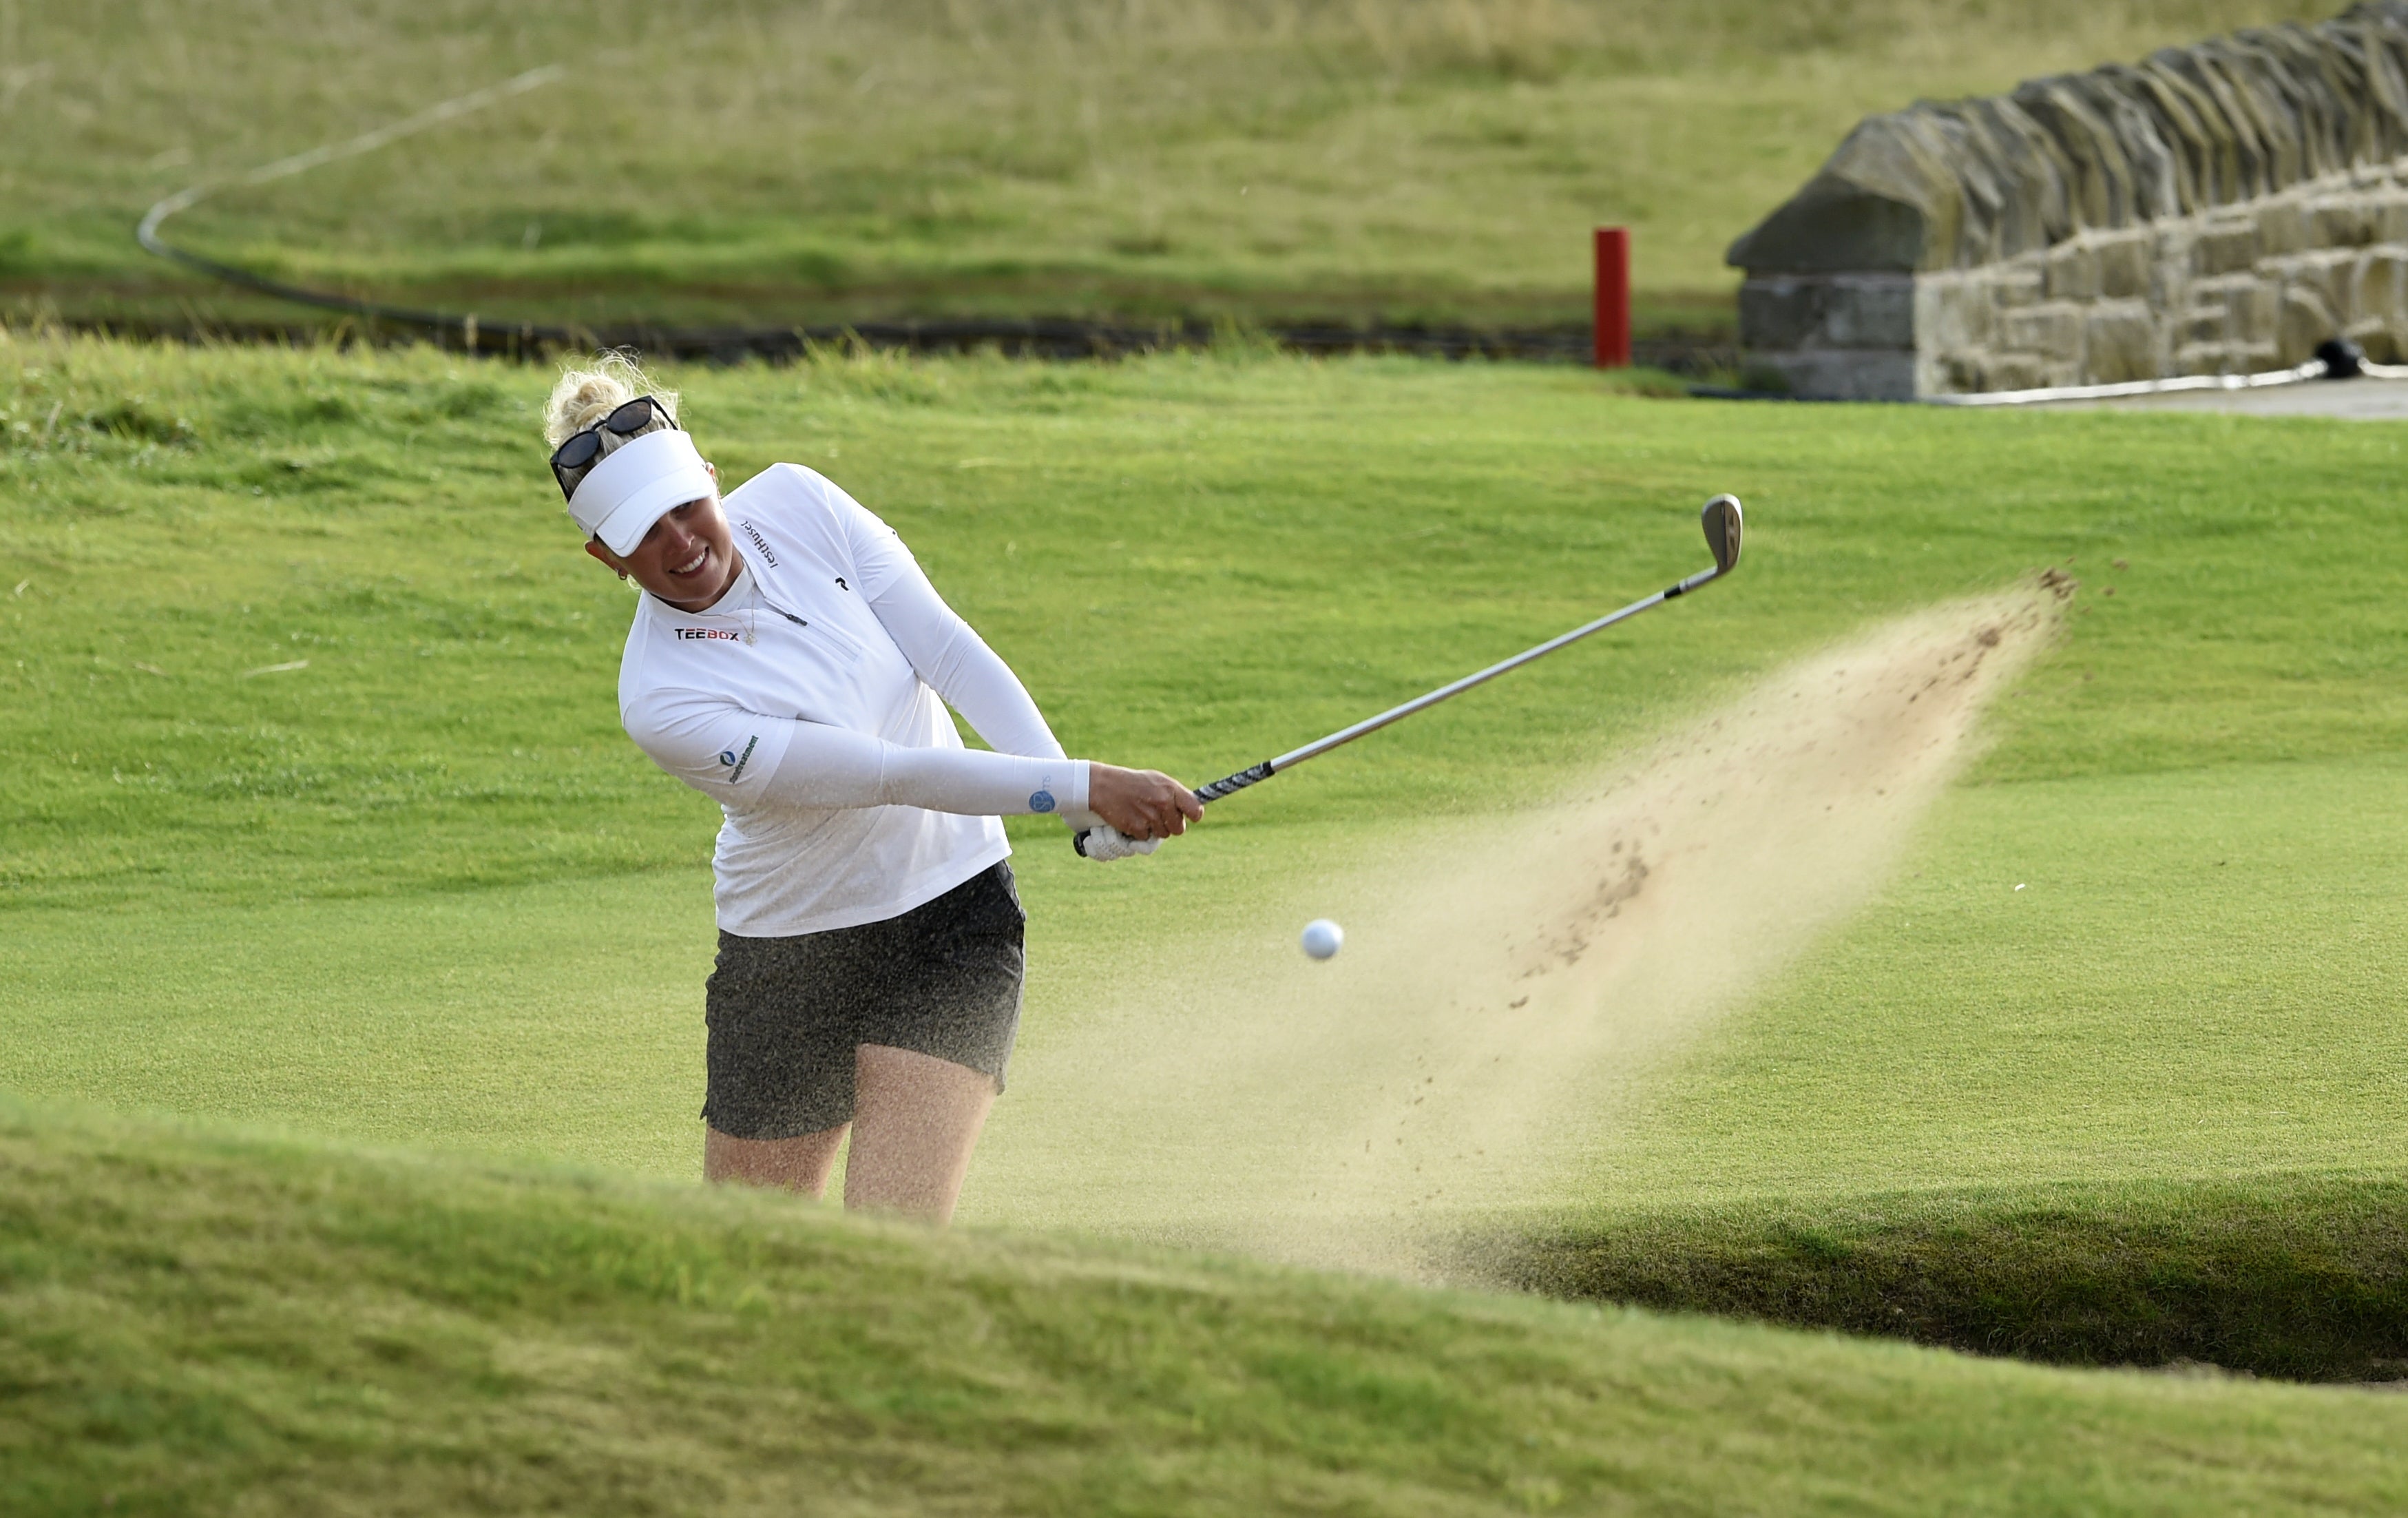 Nanna Koerstz Madsen shanked her bunker shot on the final hole of the AIG Women’s Open at Carnoustie